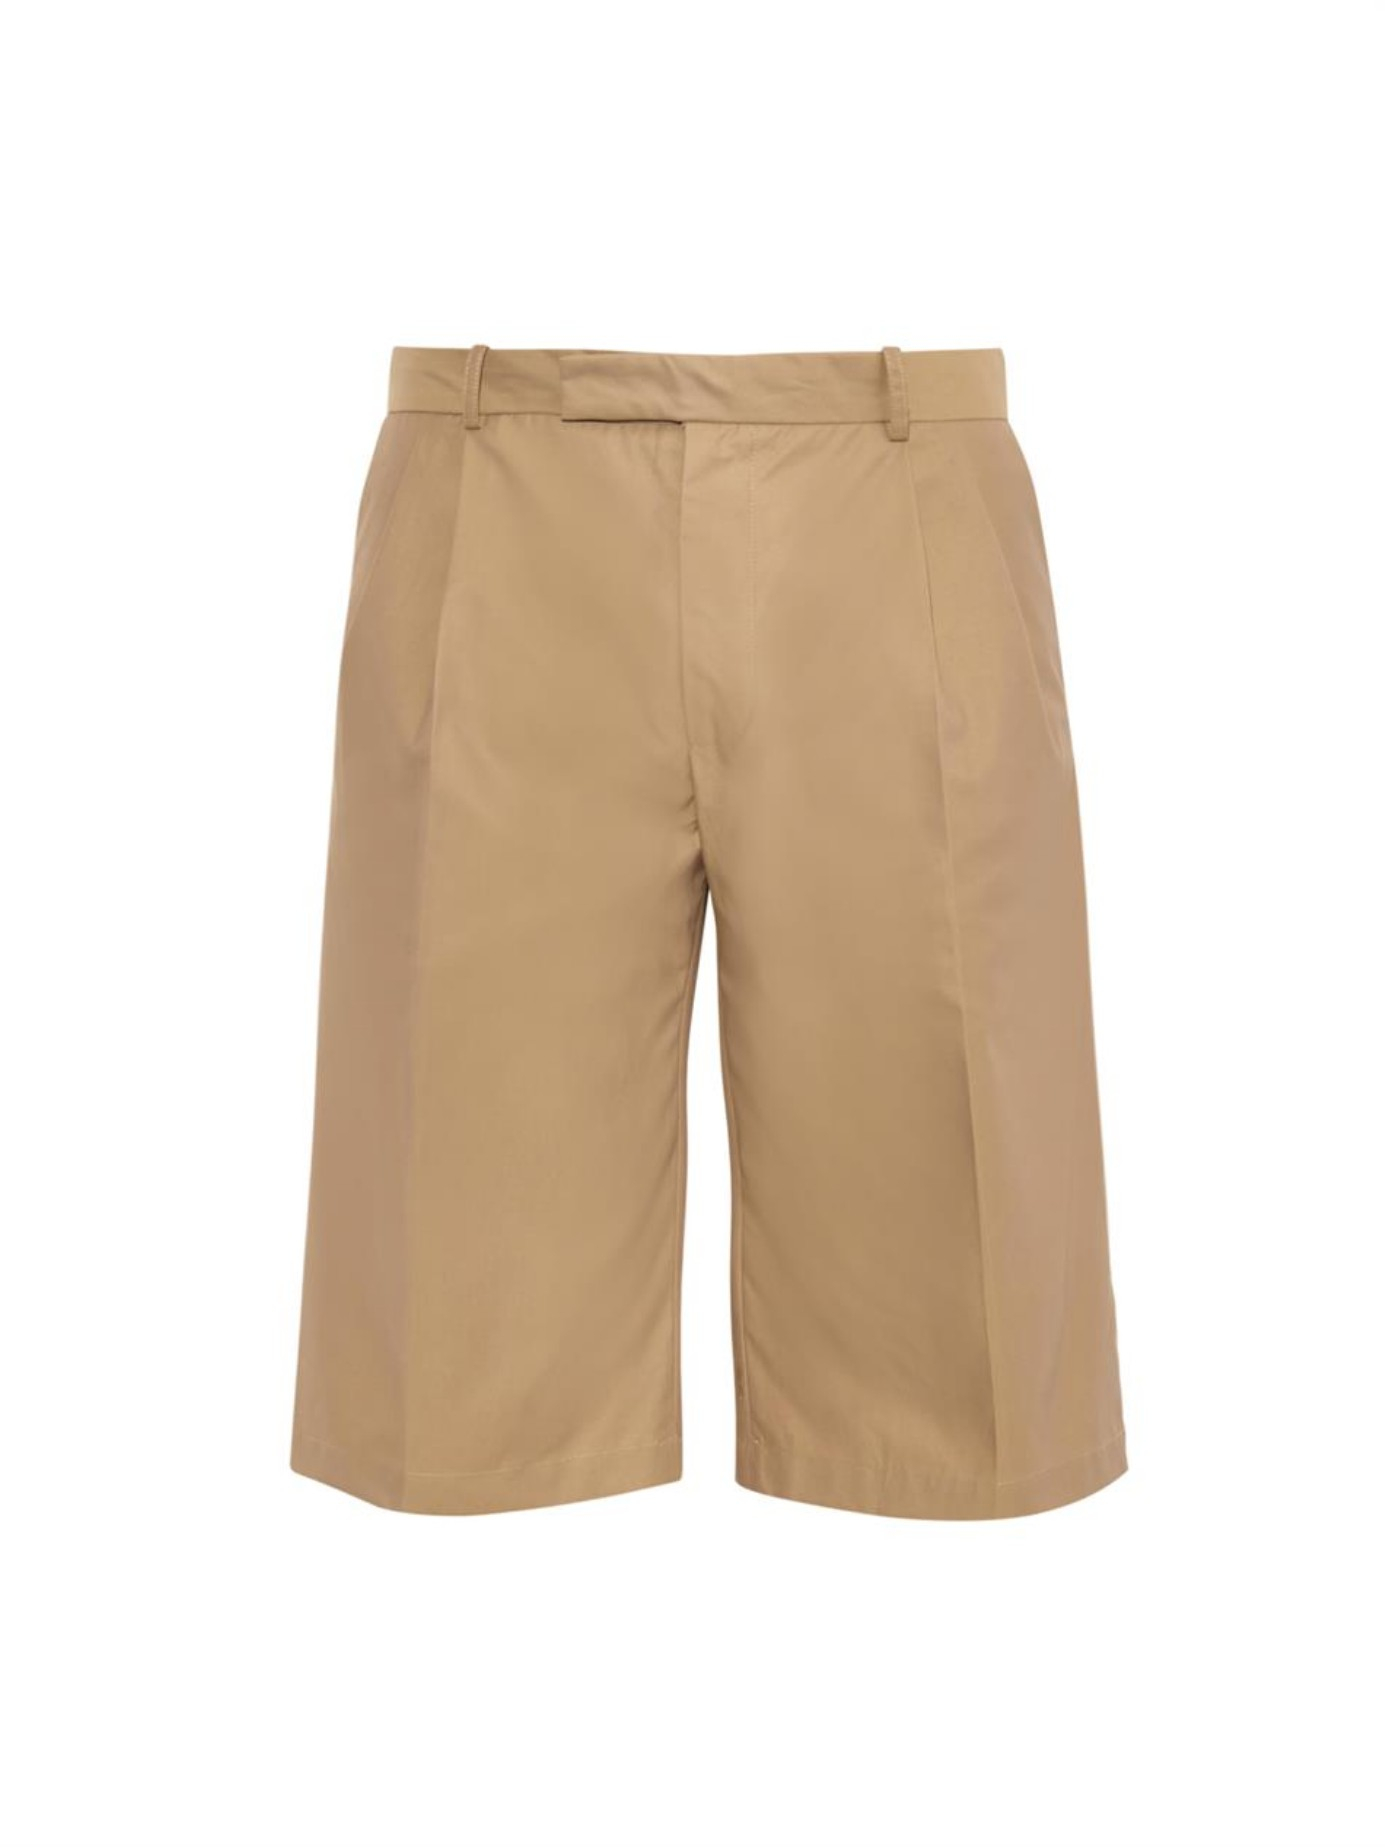 Lyst - J.W.Anderson Pleated-front Shorts in Natural for Men